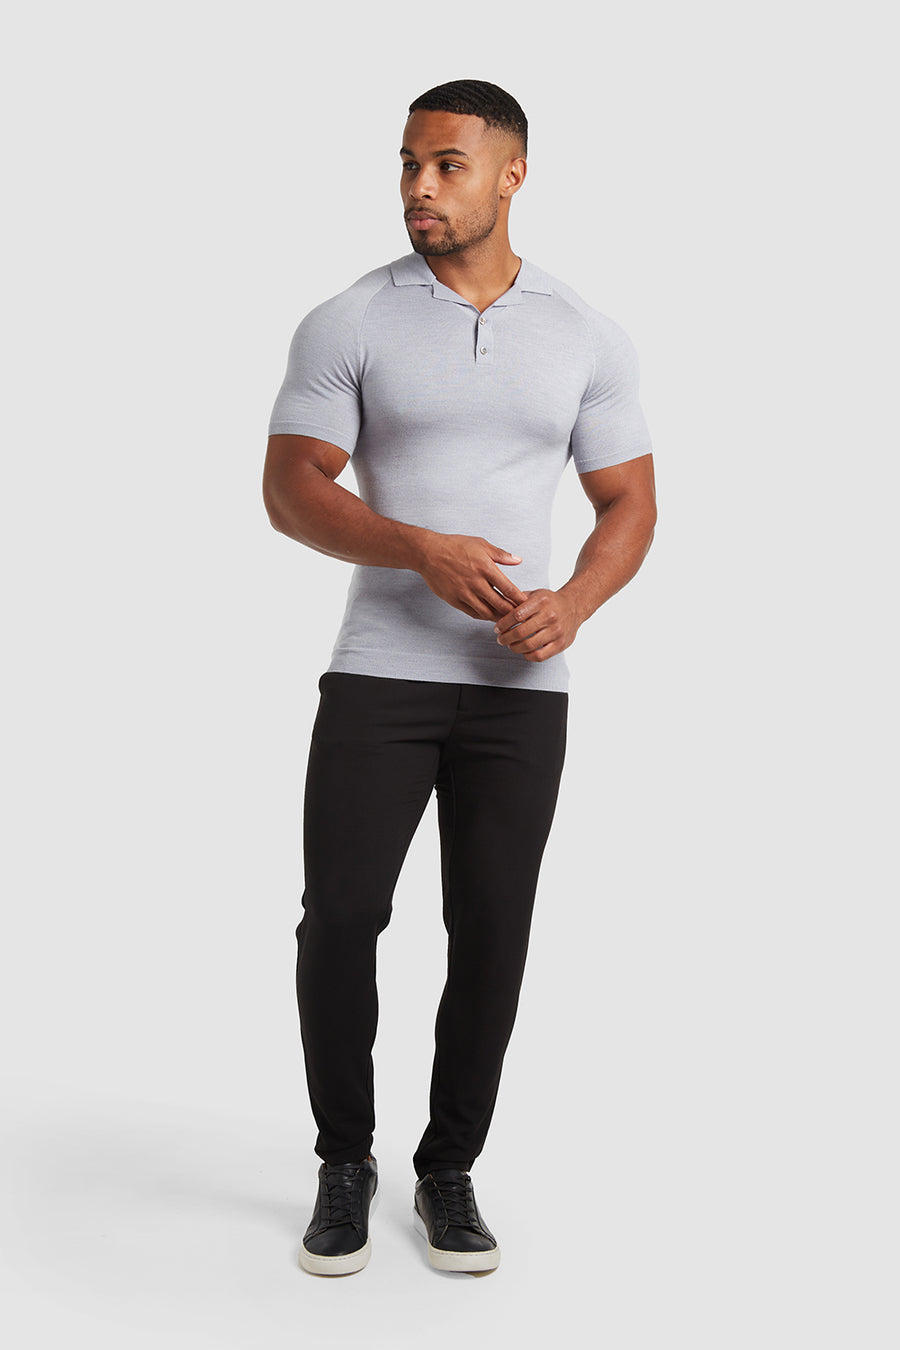 Merino Open Collar Knitted Polo in Ice Marl - TAILORED ATHLETE - USA